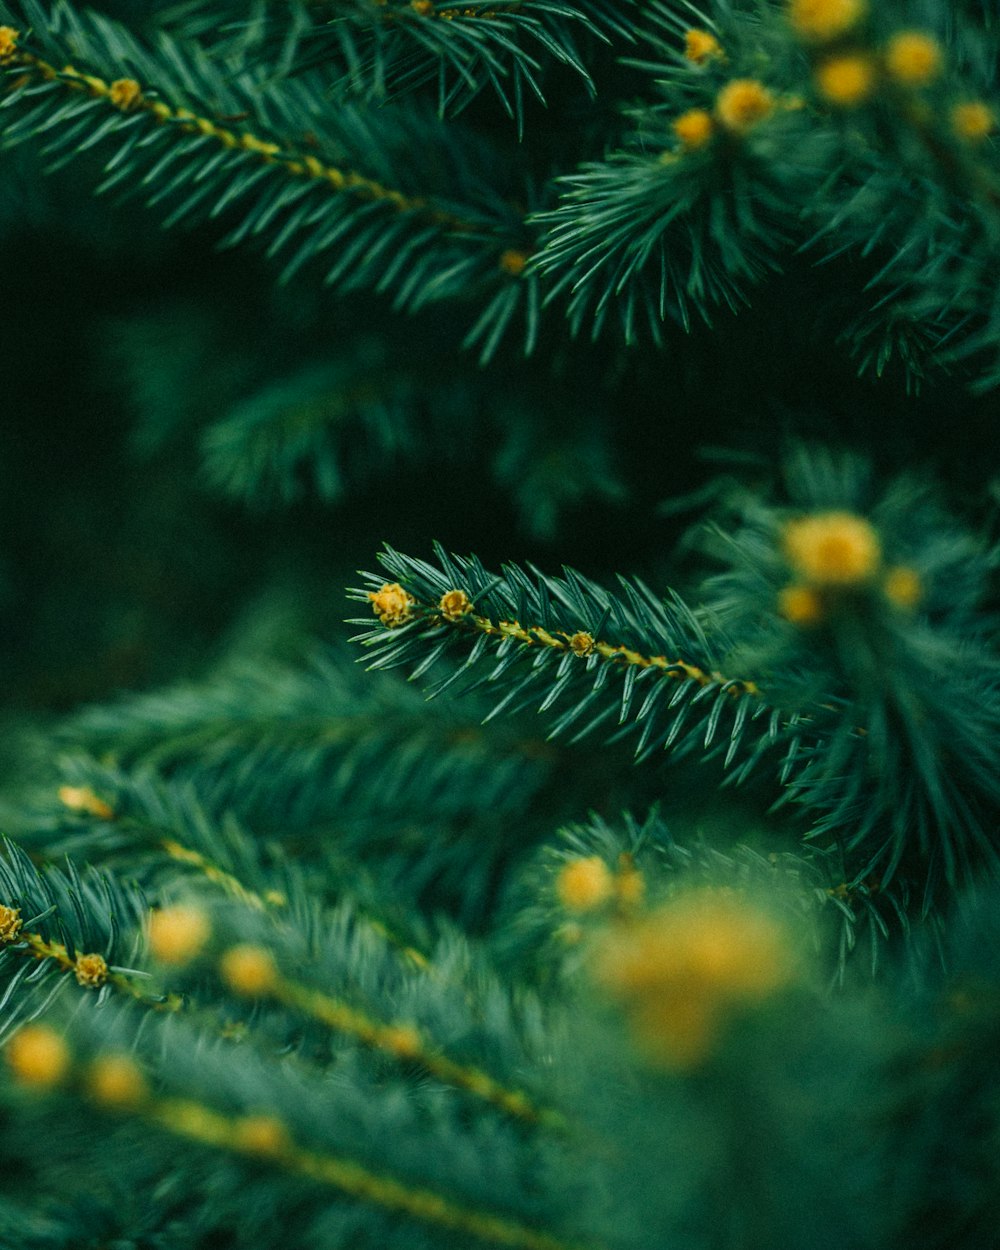 a close up of a pine tree with yellow flowers